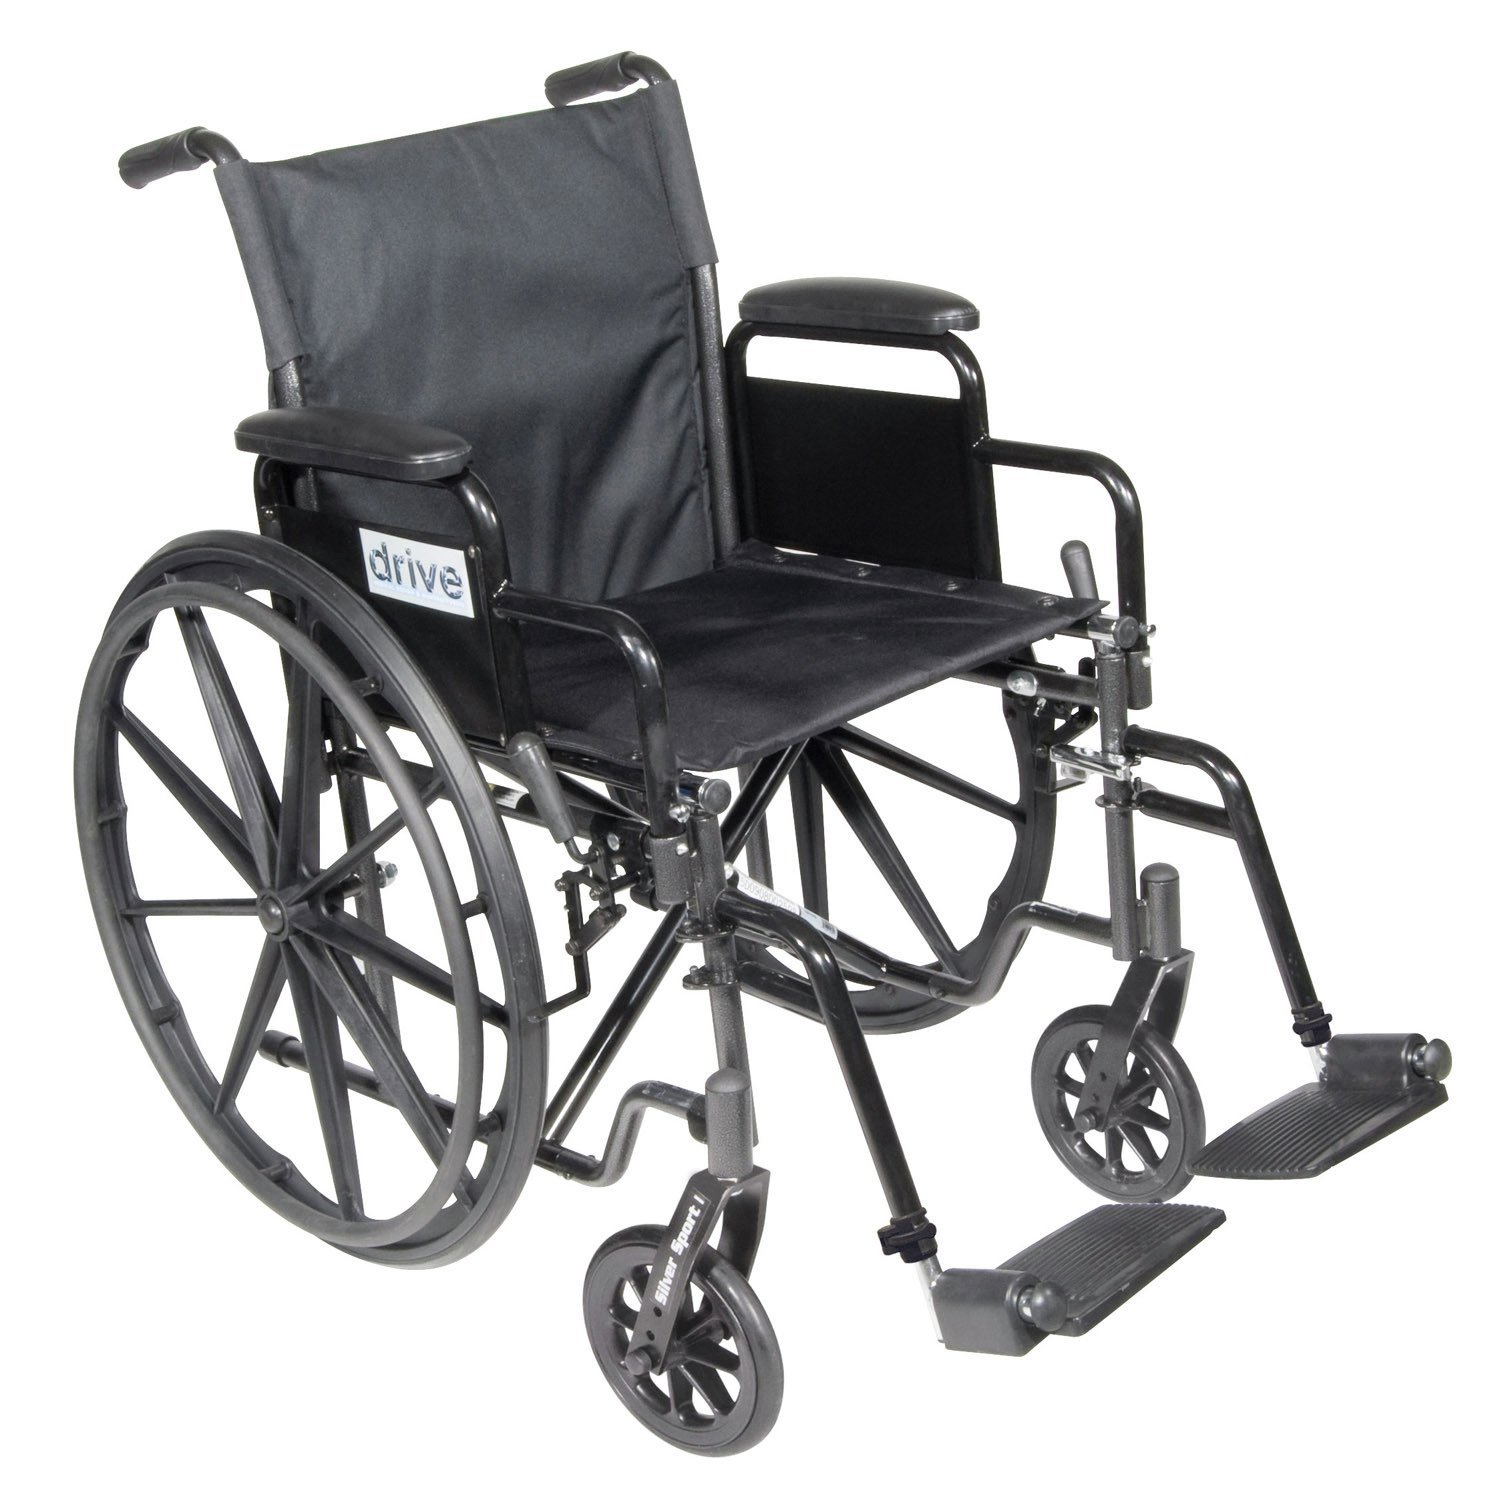 Drive Devilbiss Self Propelled Wheelchair Review